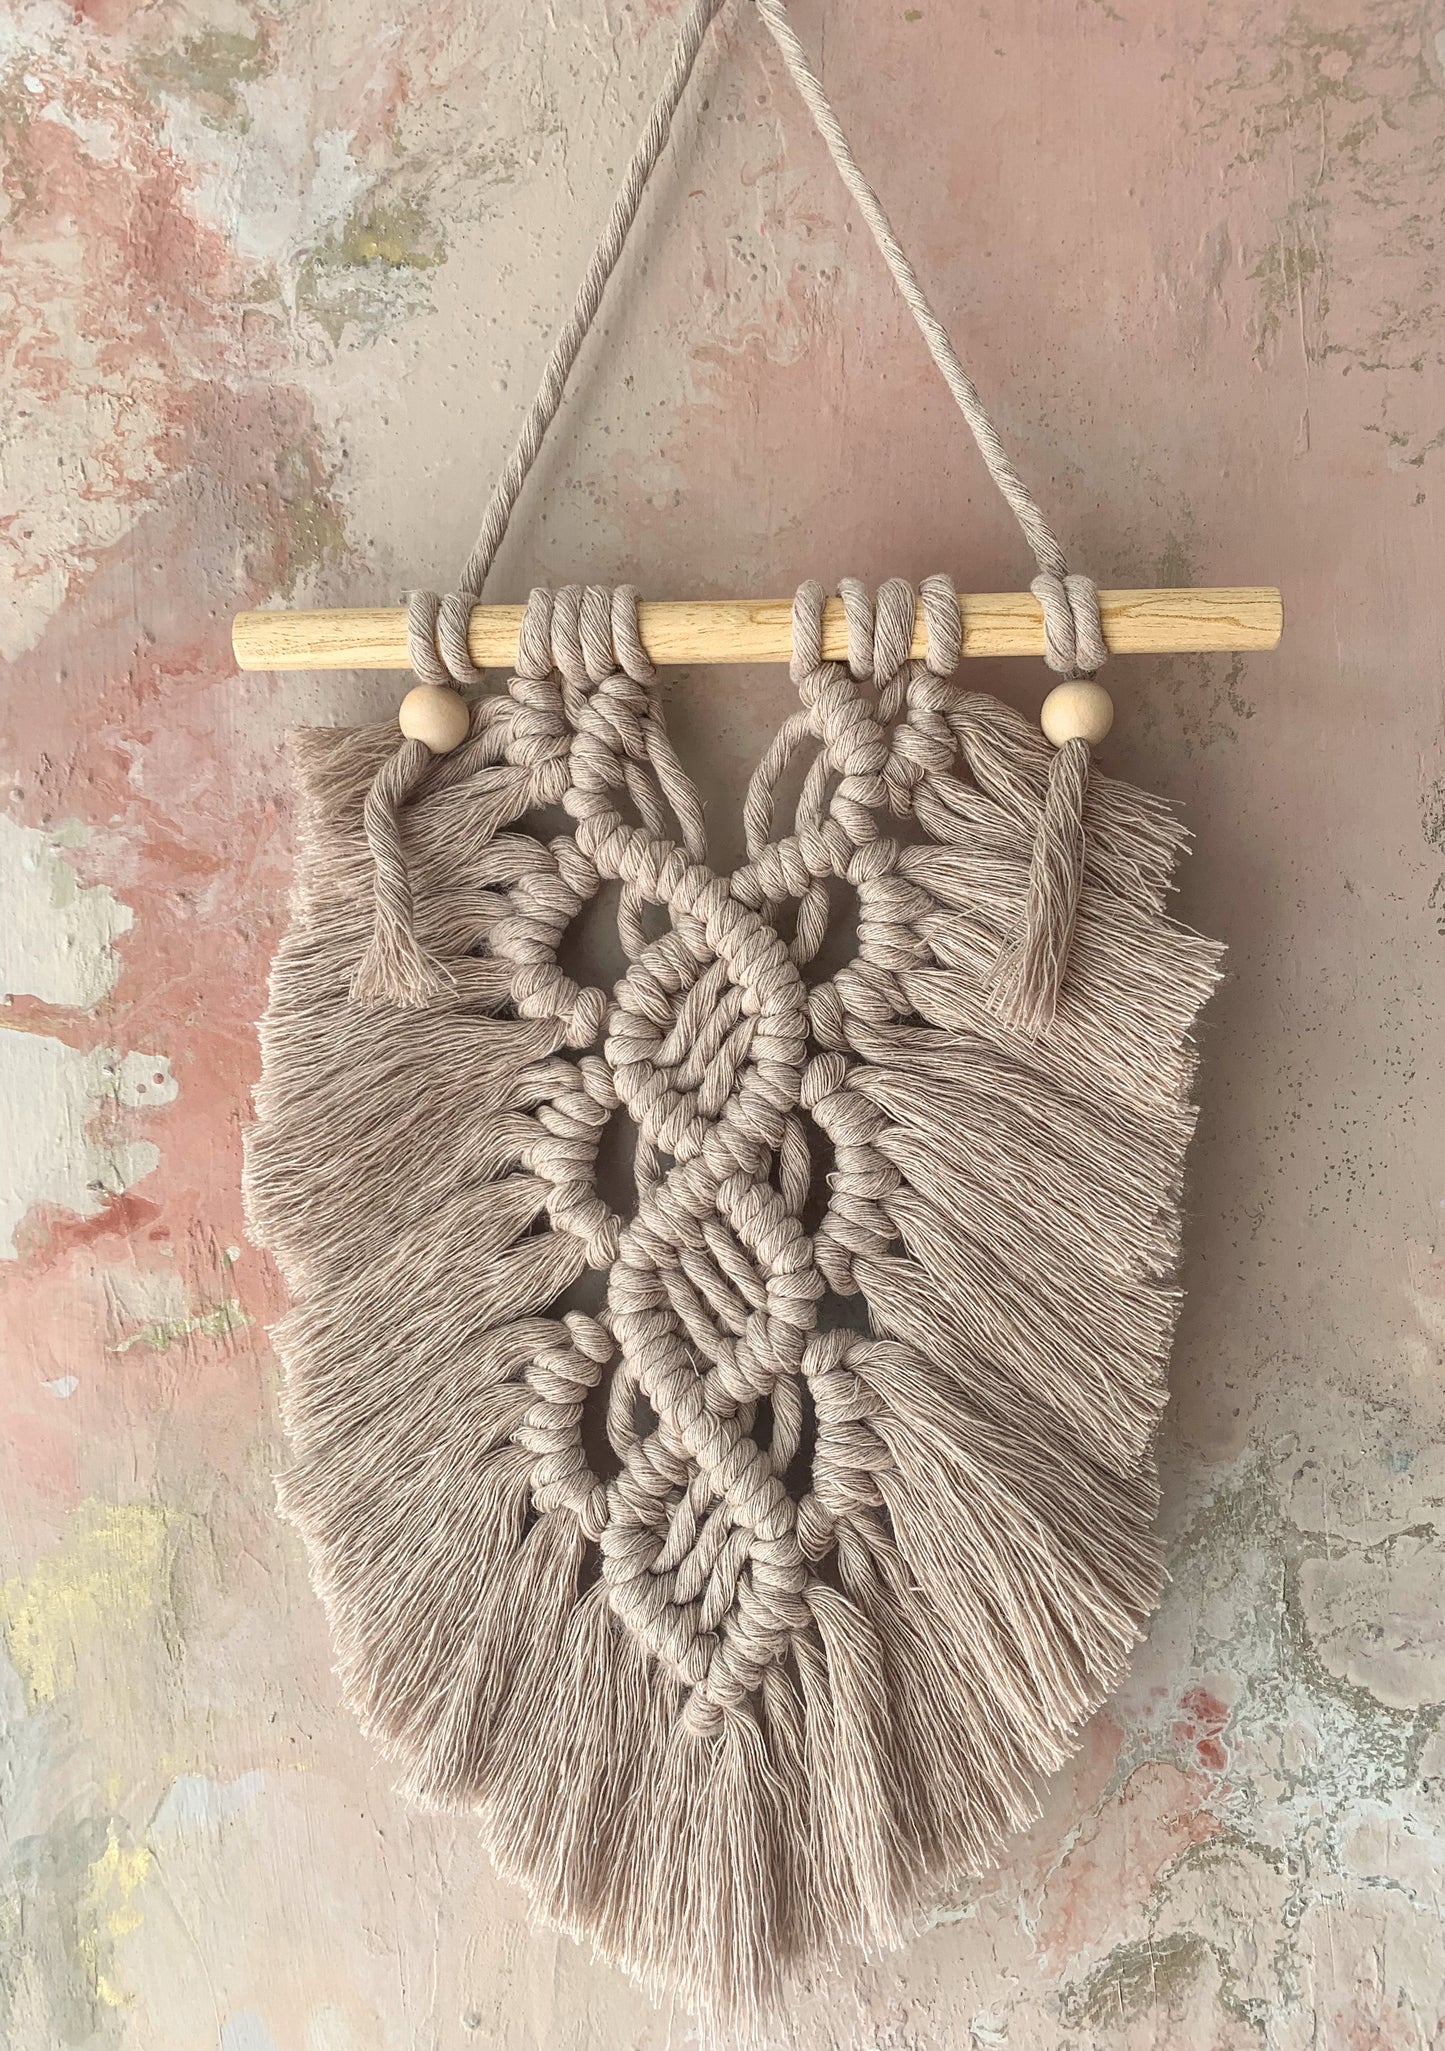 Single Feather Wall Hanging kit